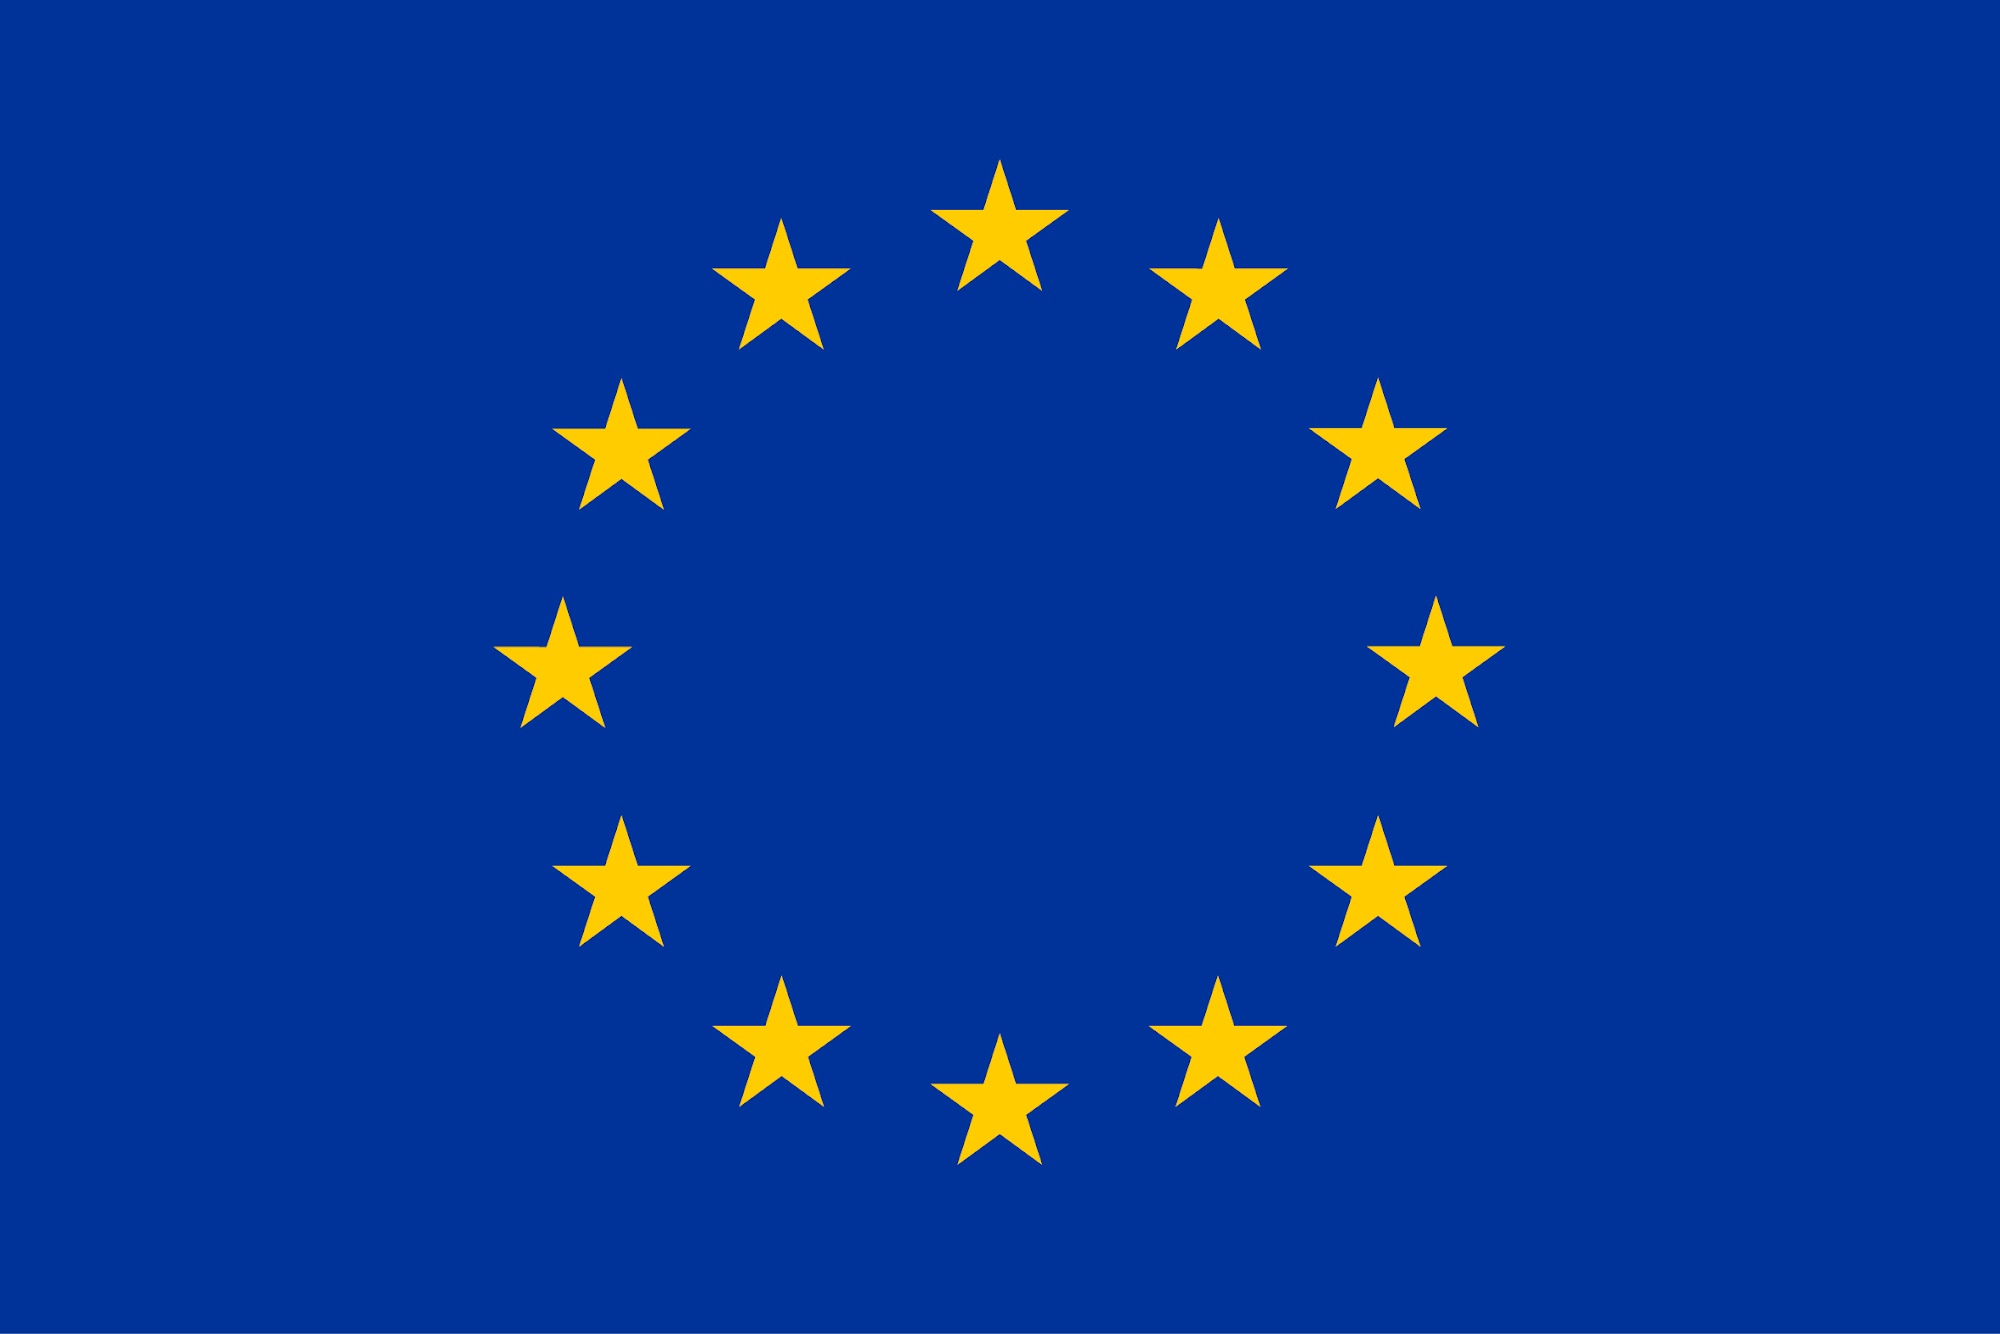 The flag of the EU, signaling that we only deliver in the EU